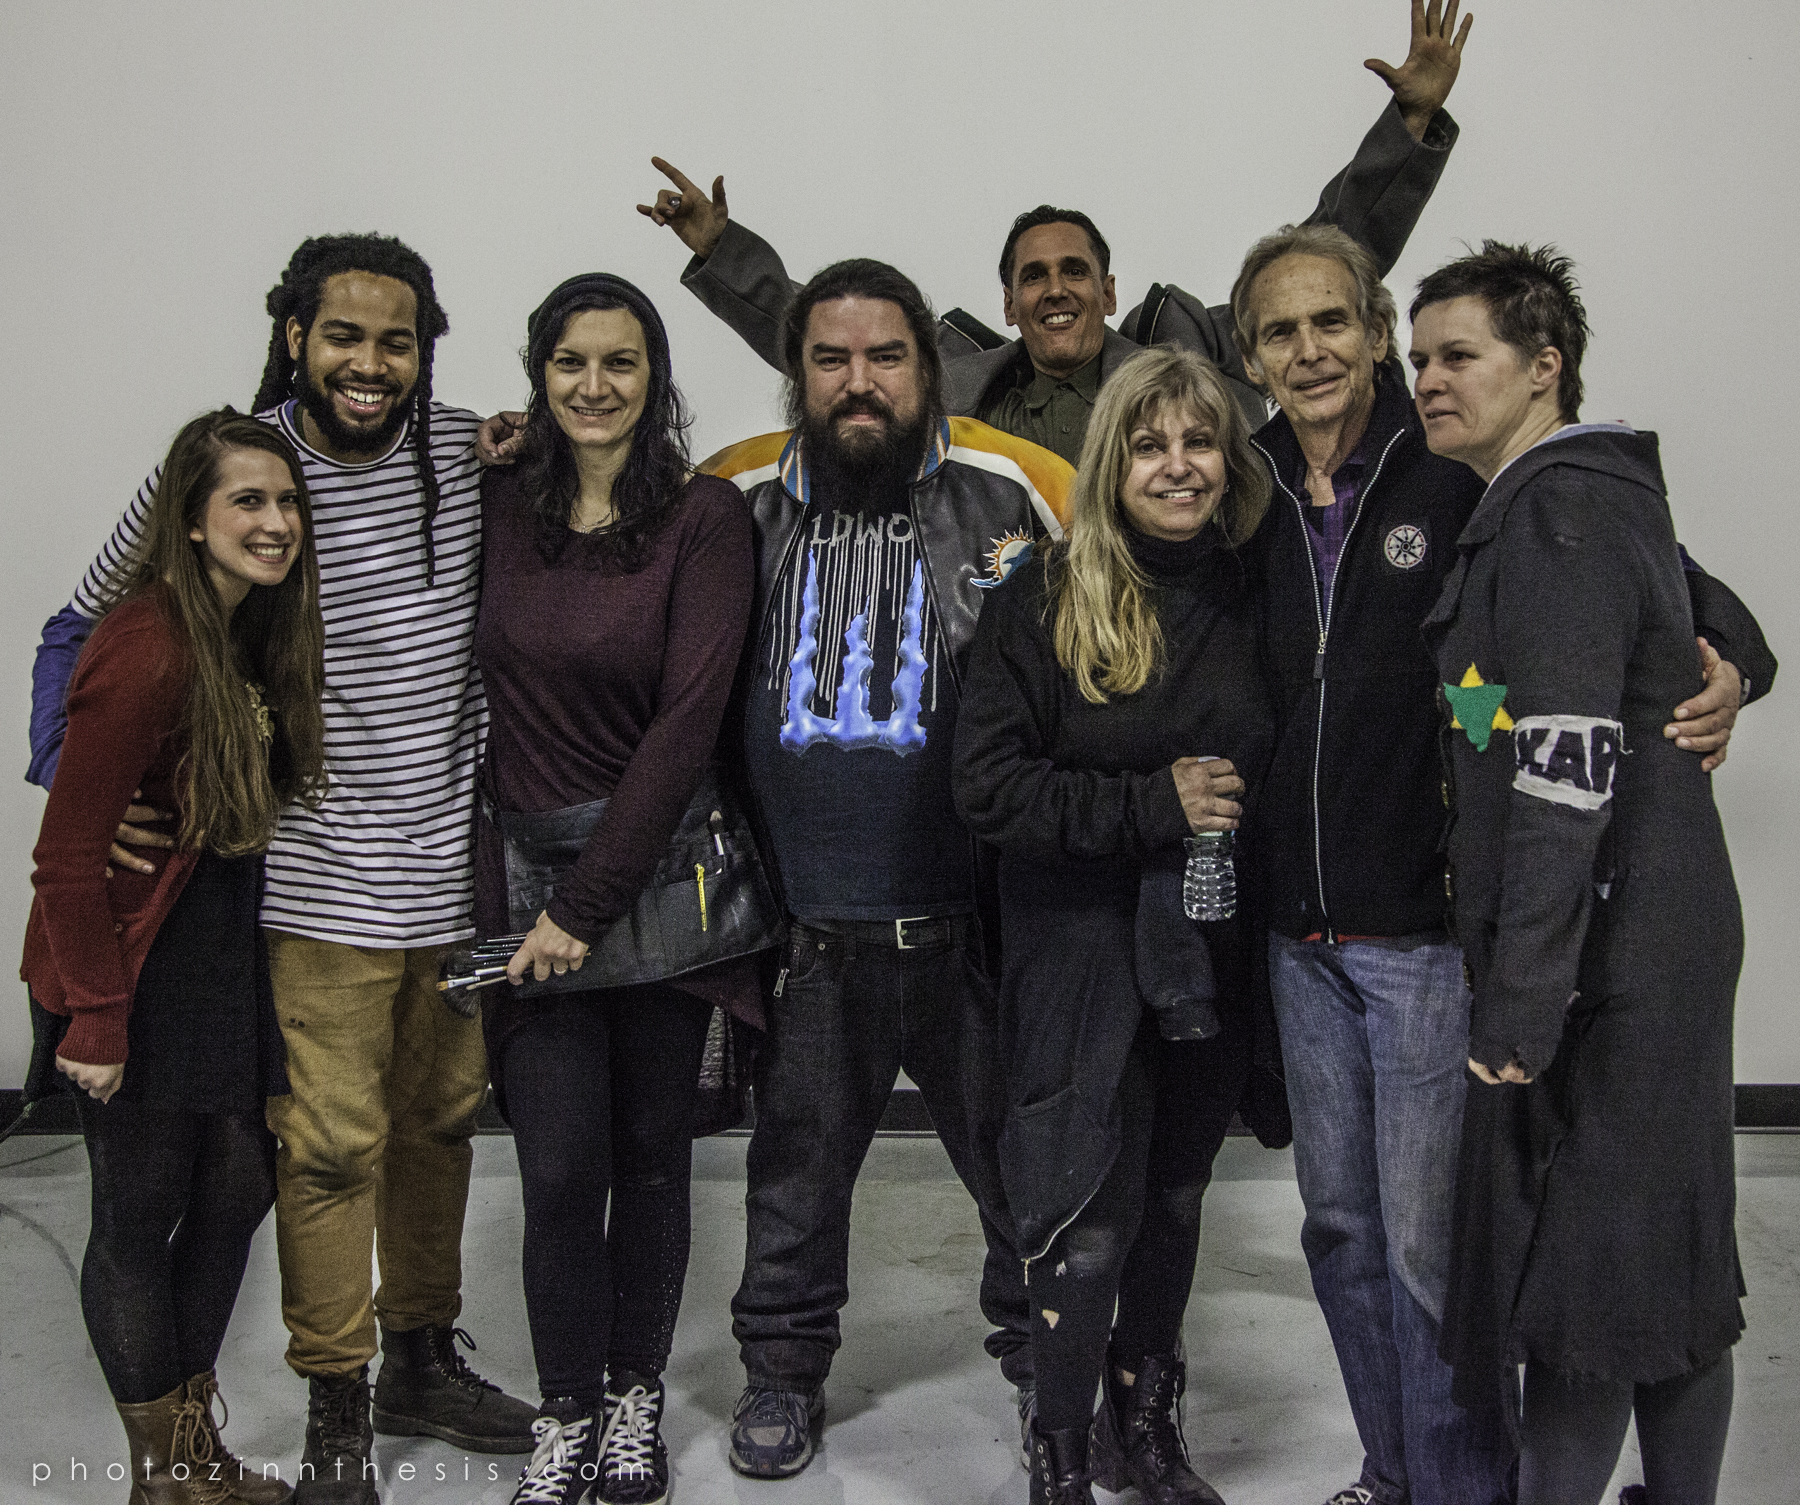 The crew! Such a wonderful time working on this film. Cast and crew of this beautiful short film called, 